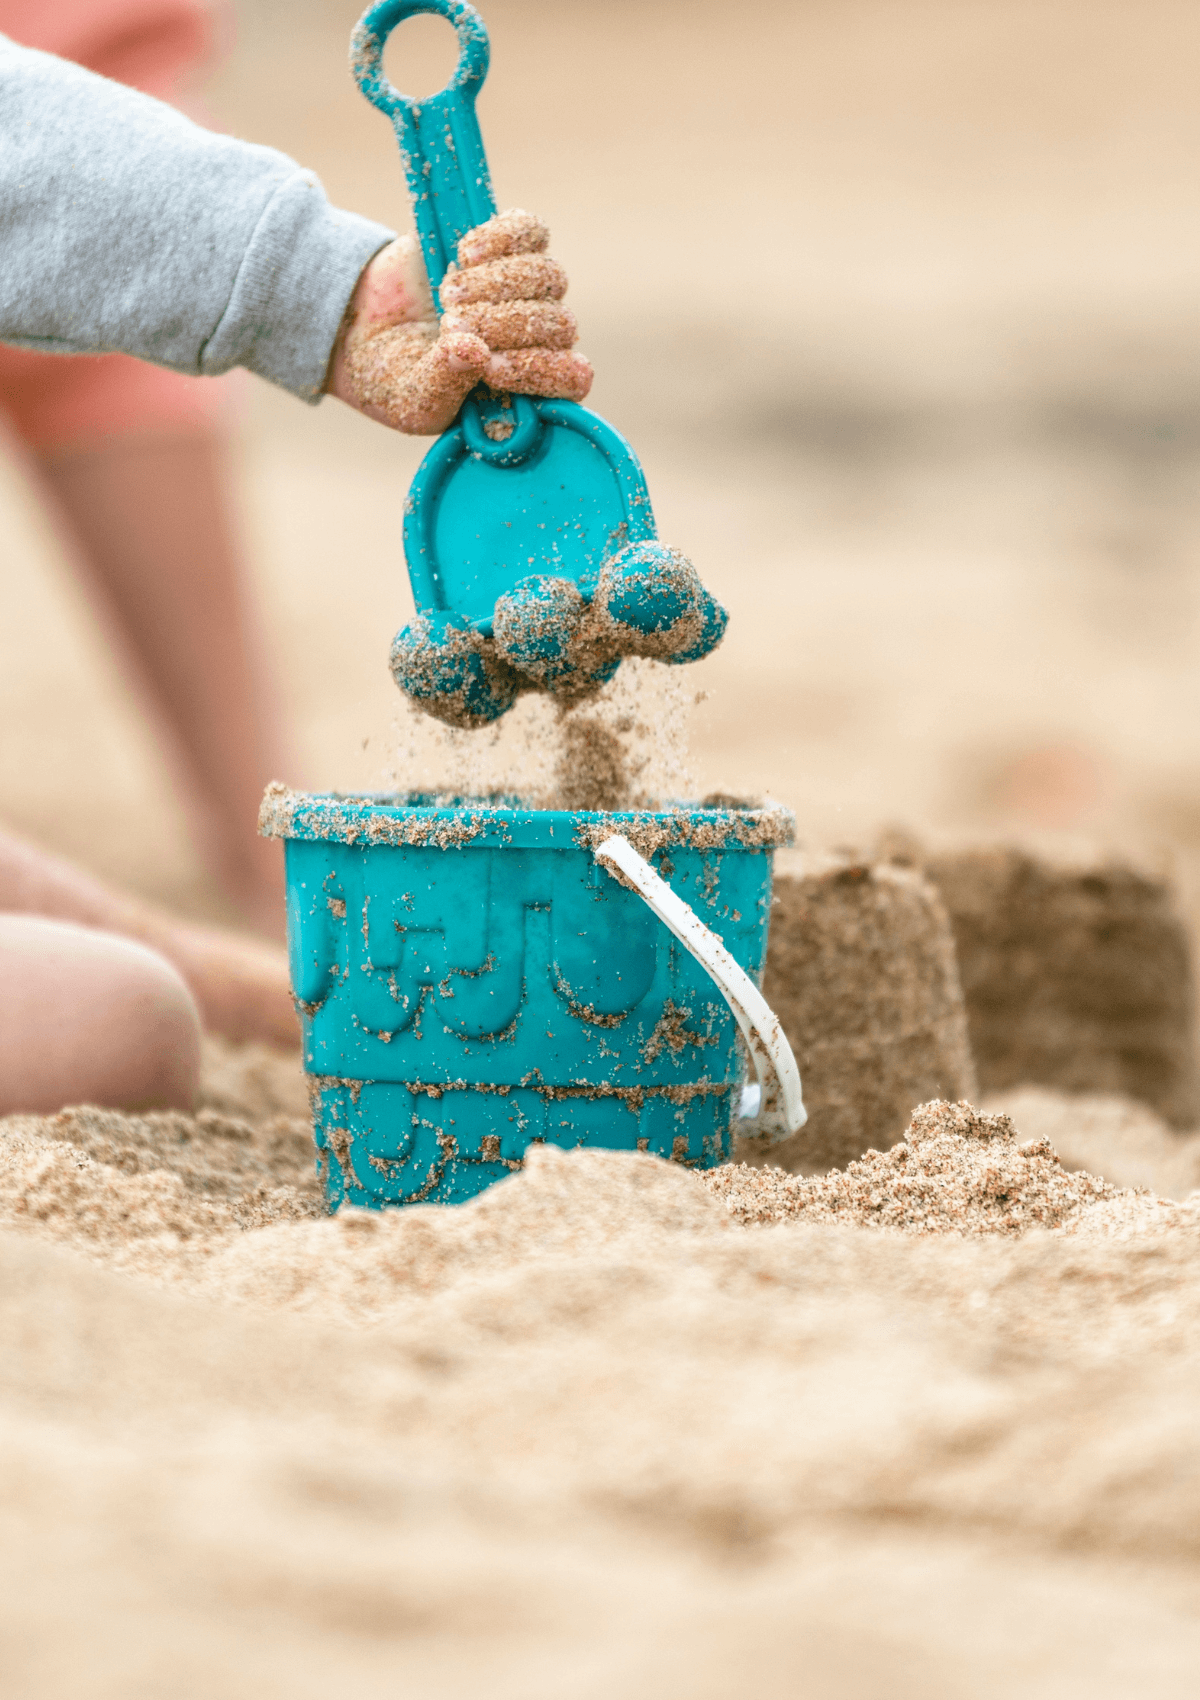 sand toys are important items to take to the beach